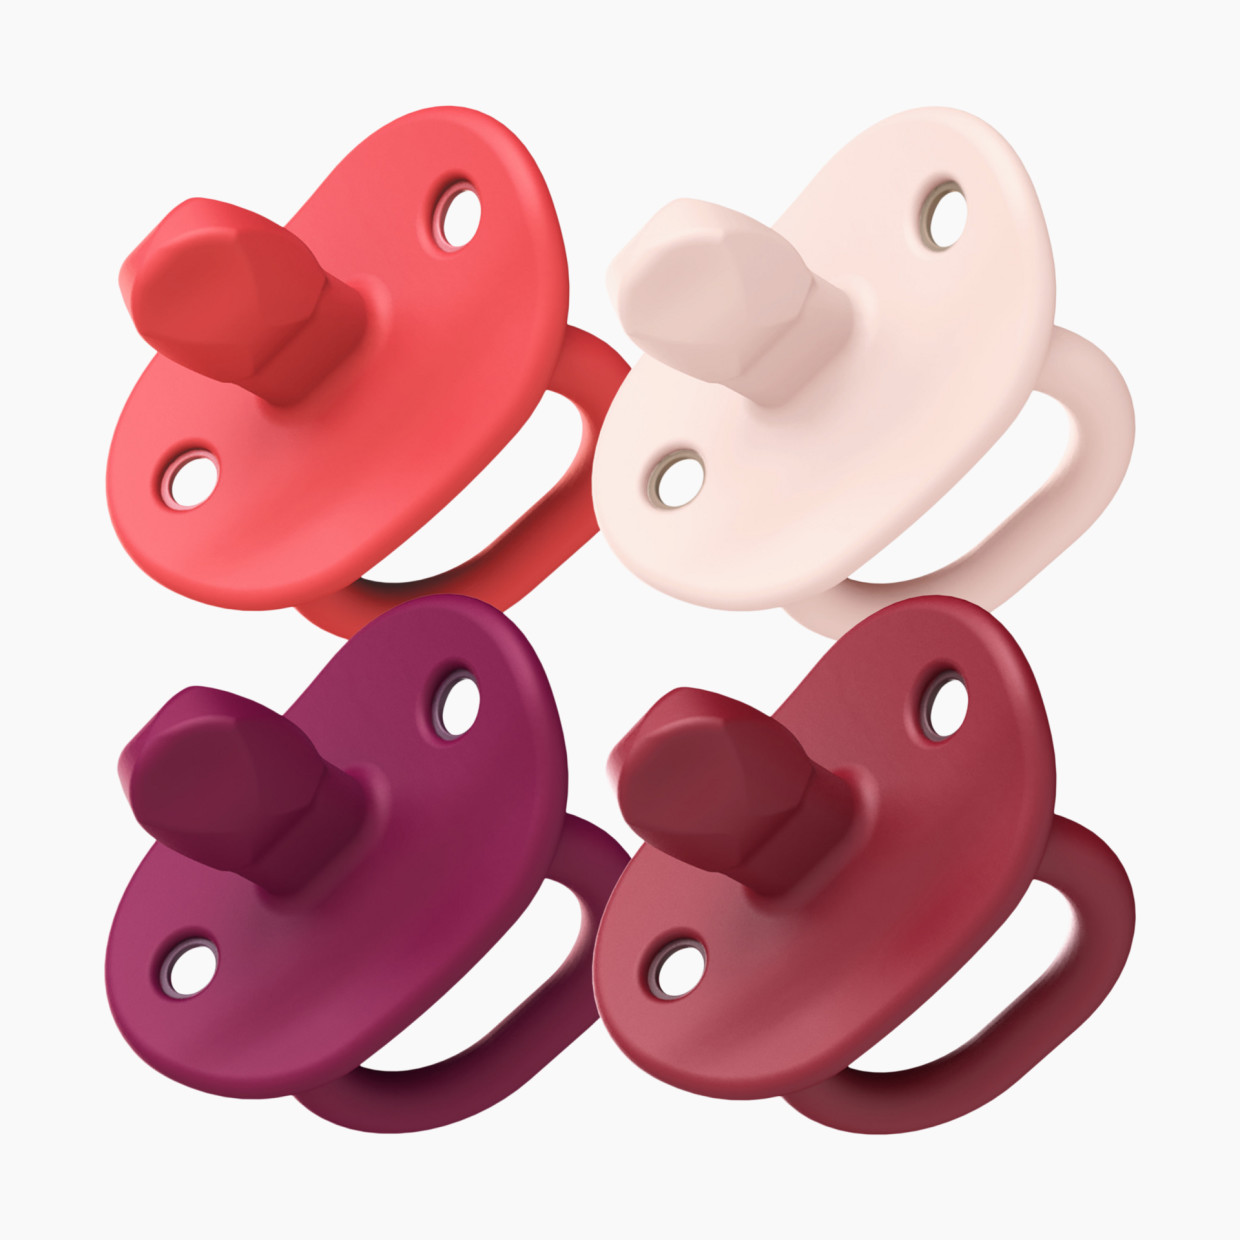 Boon JEWL Biometric Orthodontic Pacifier (4-Pack) - Pink.